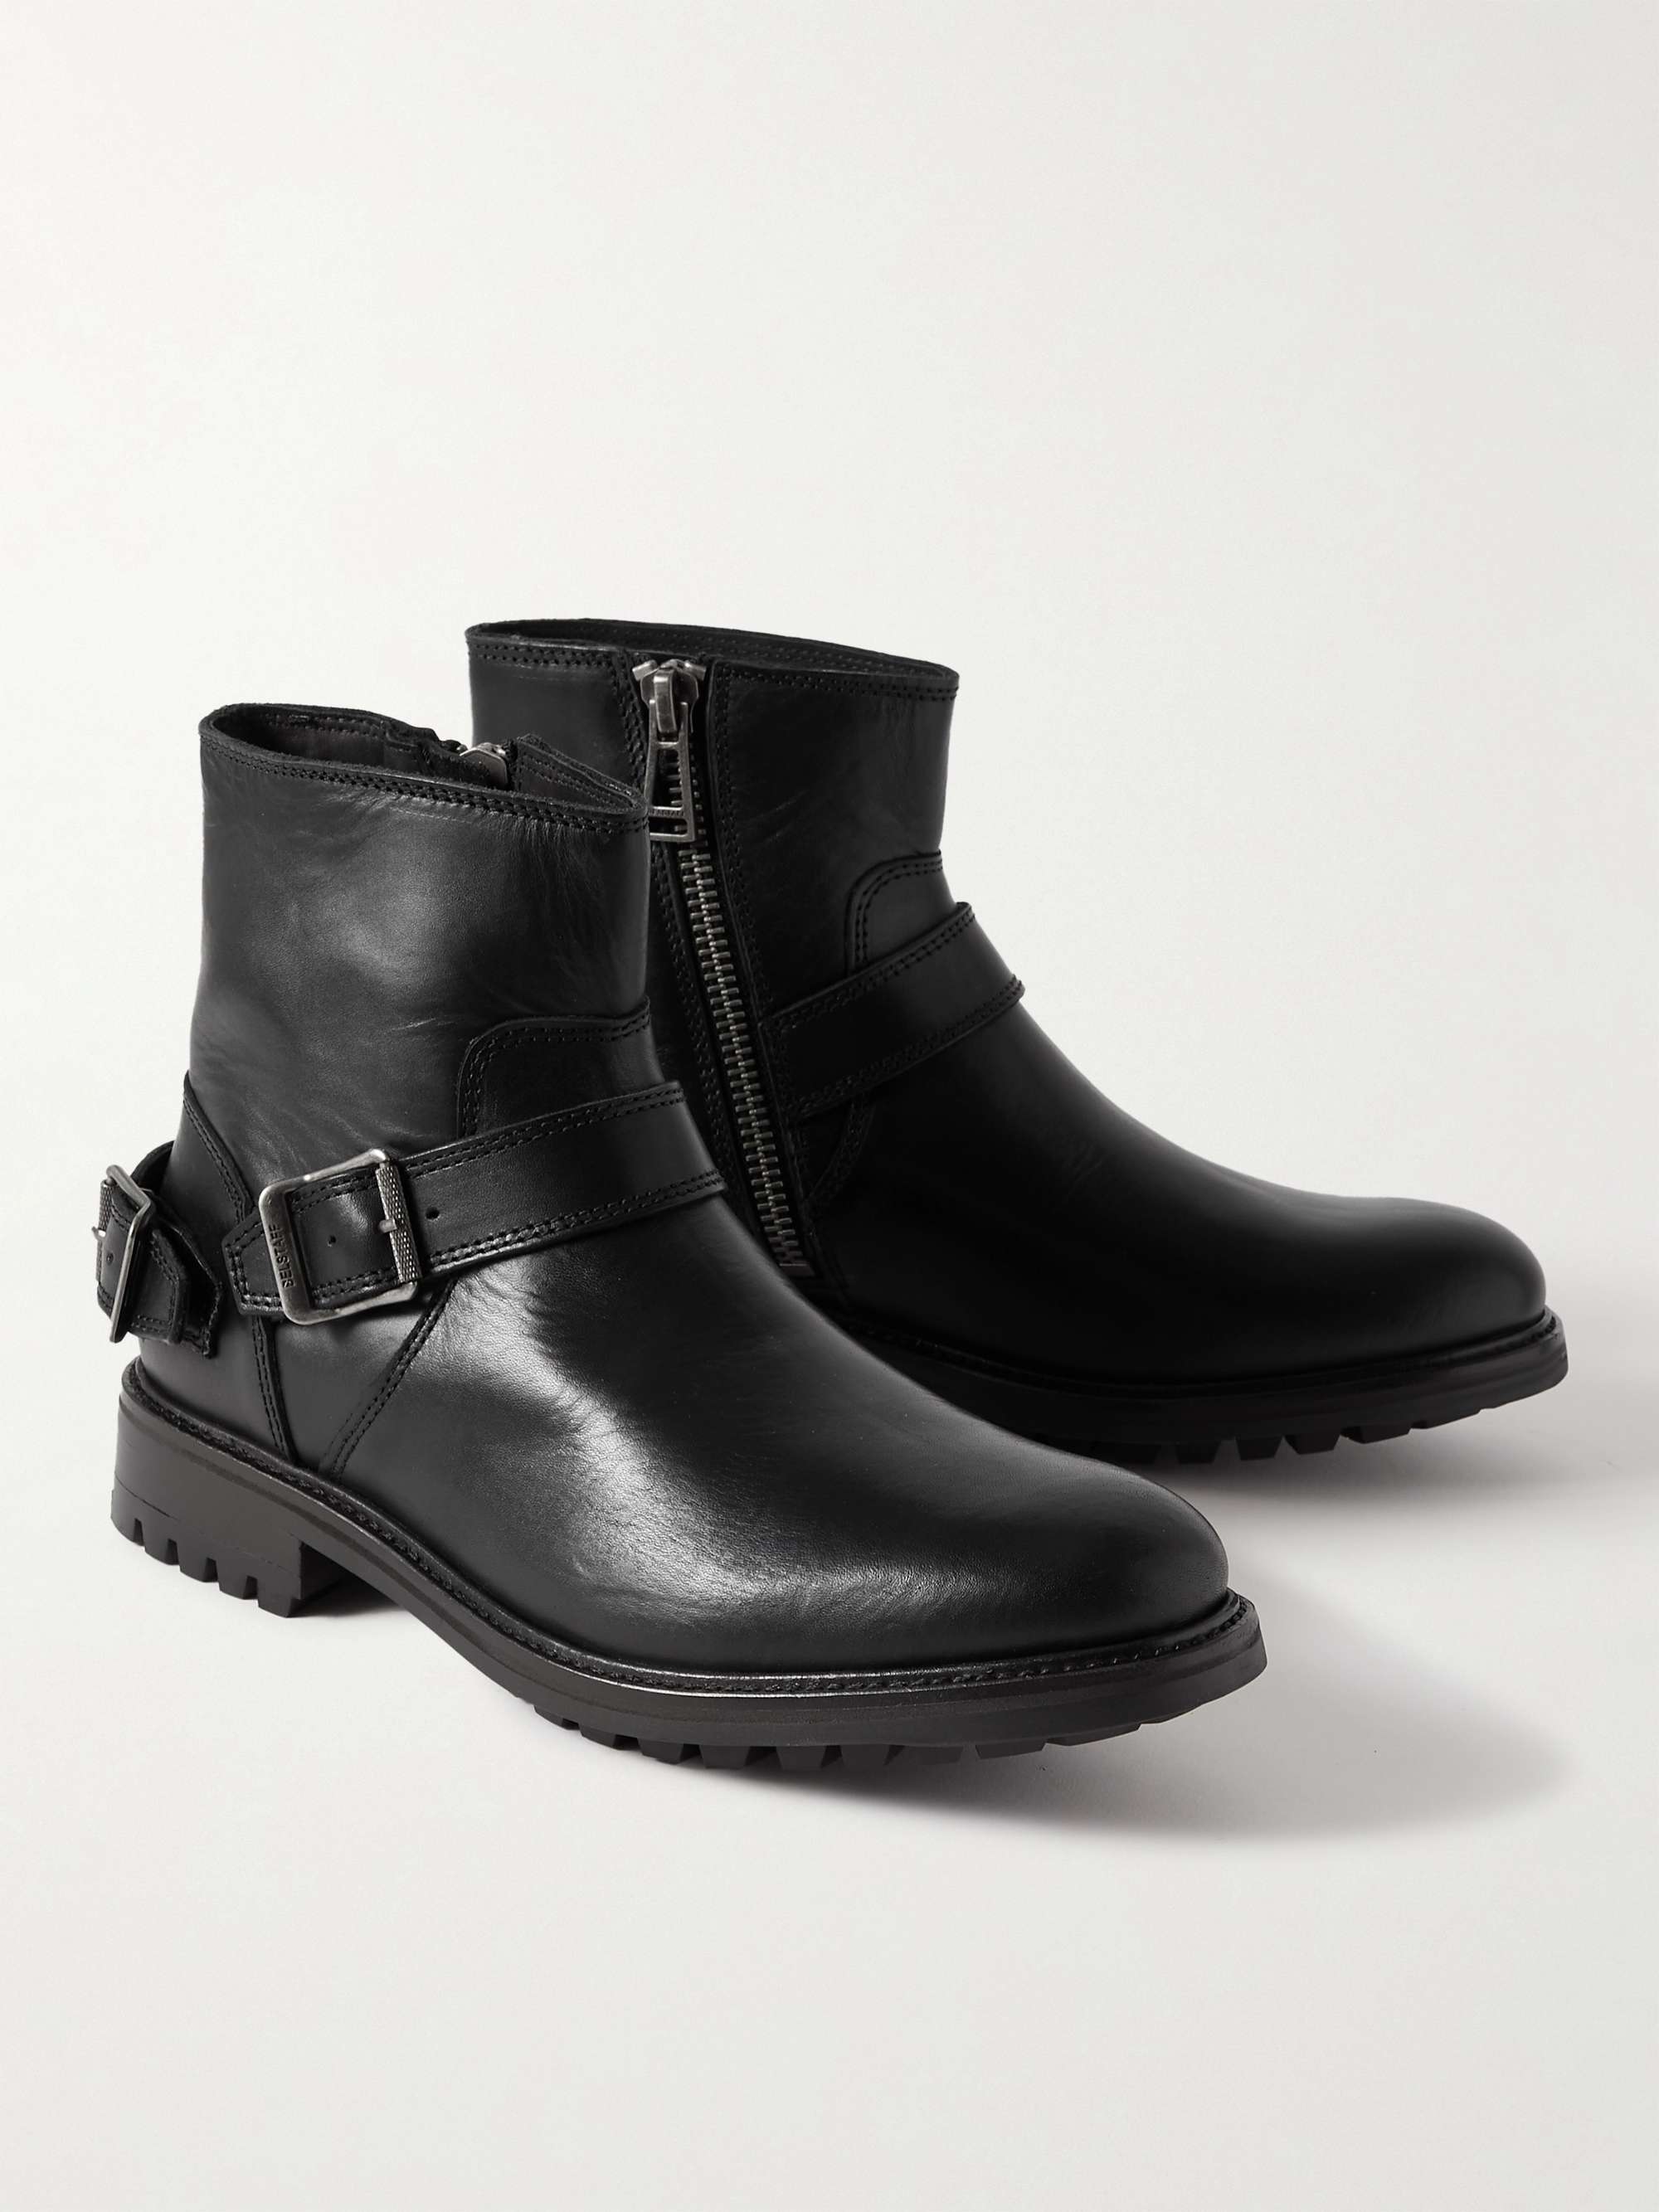 BELSTAFF Trialmaster Leather Boots